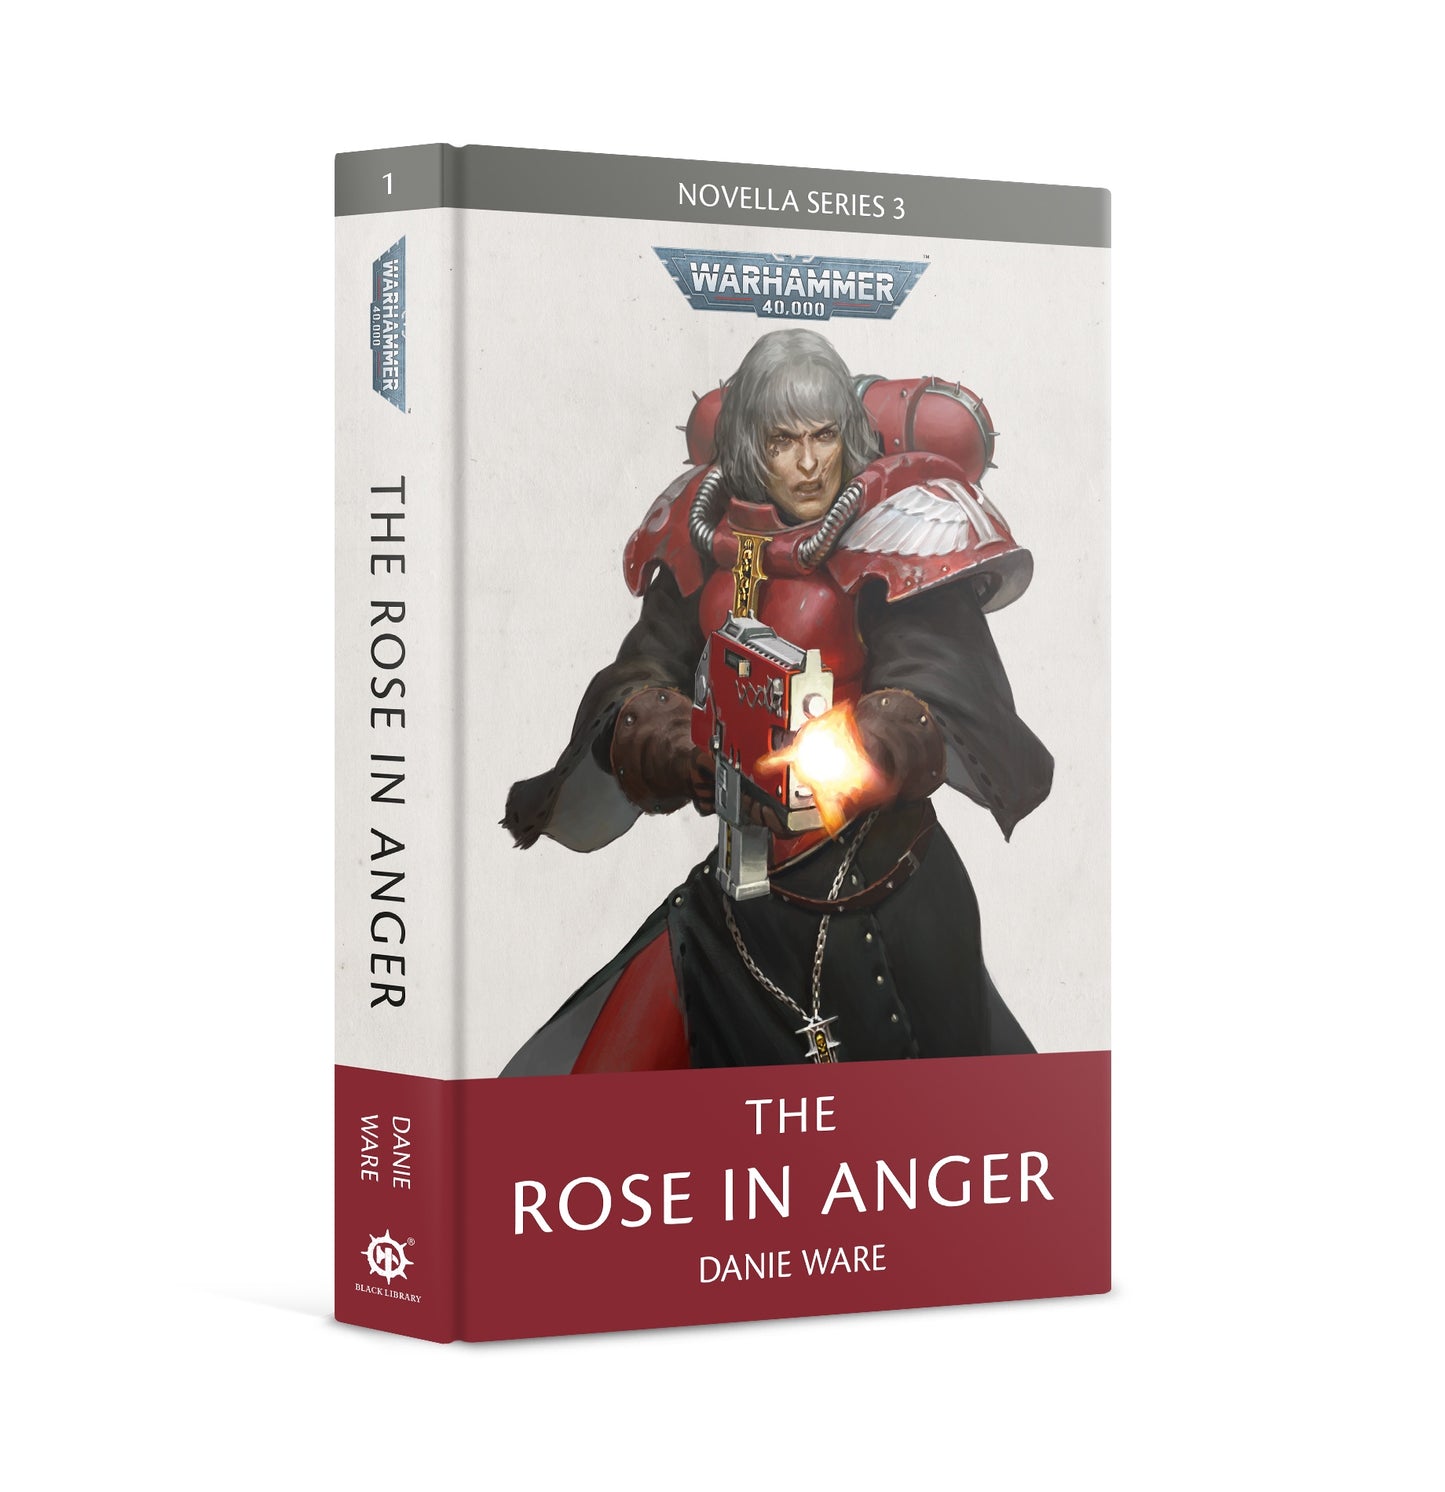 40K THE ROSE IN ANGER HC BY DANIE WARE